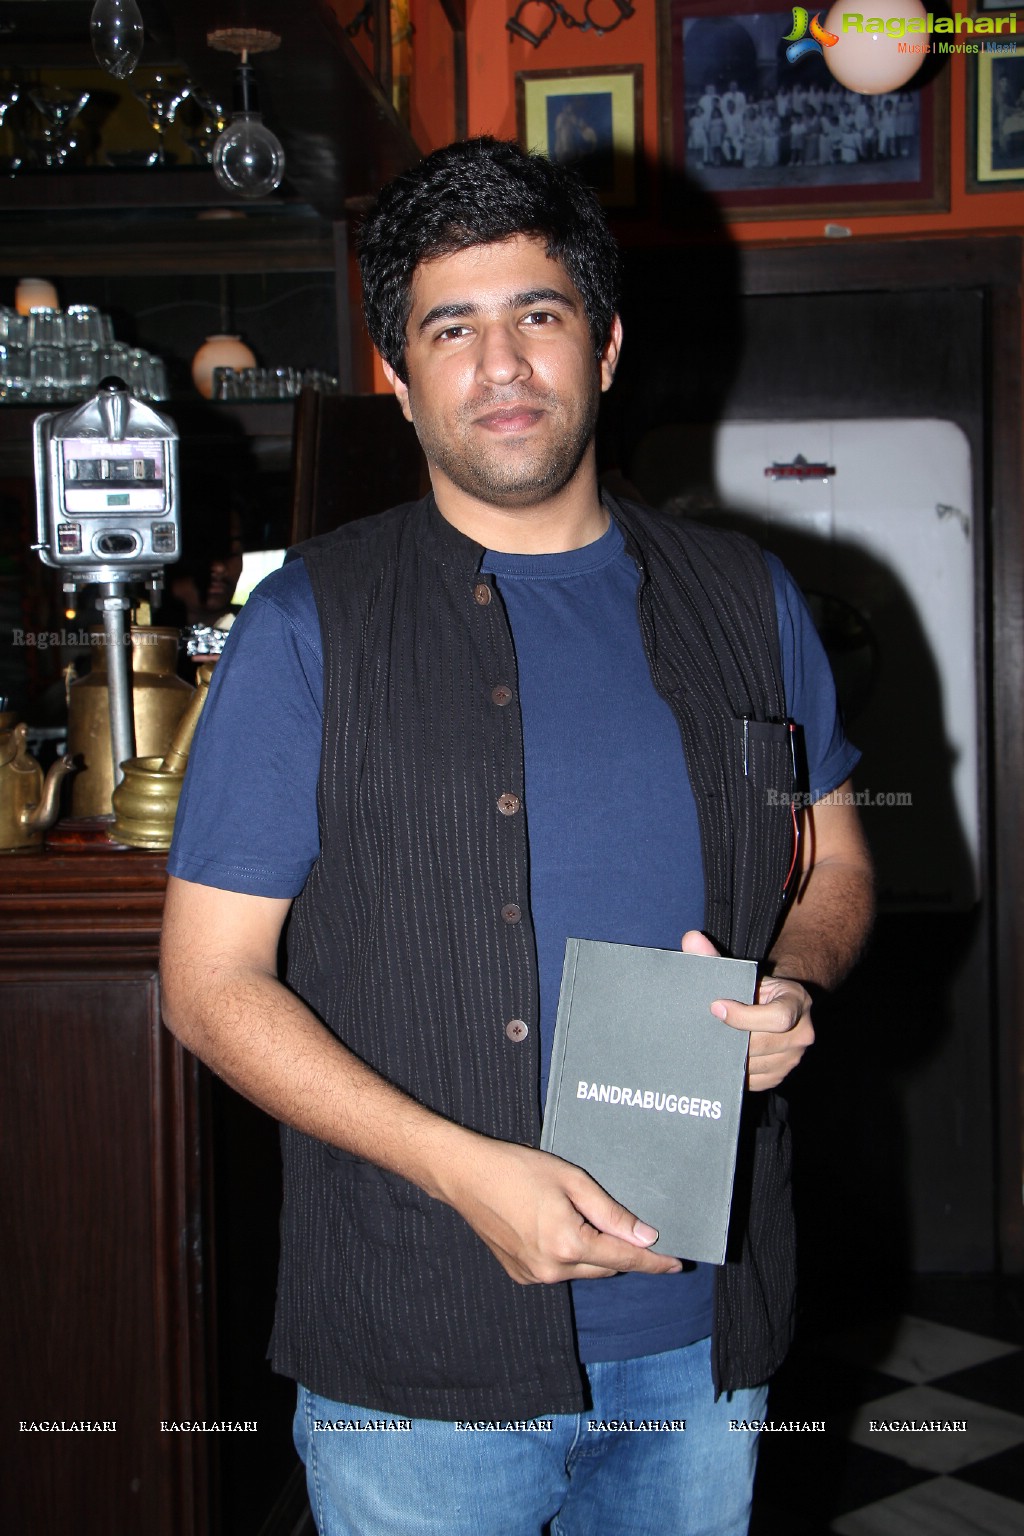 Bandra Buggers And Sons Book Launch at SodaBottleOpenerwala, Hyderabad